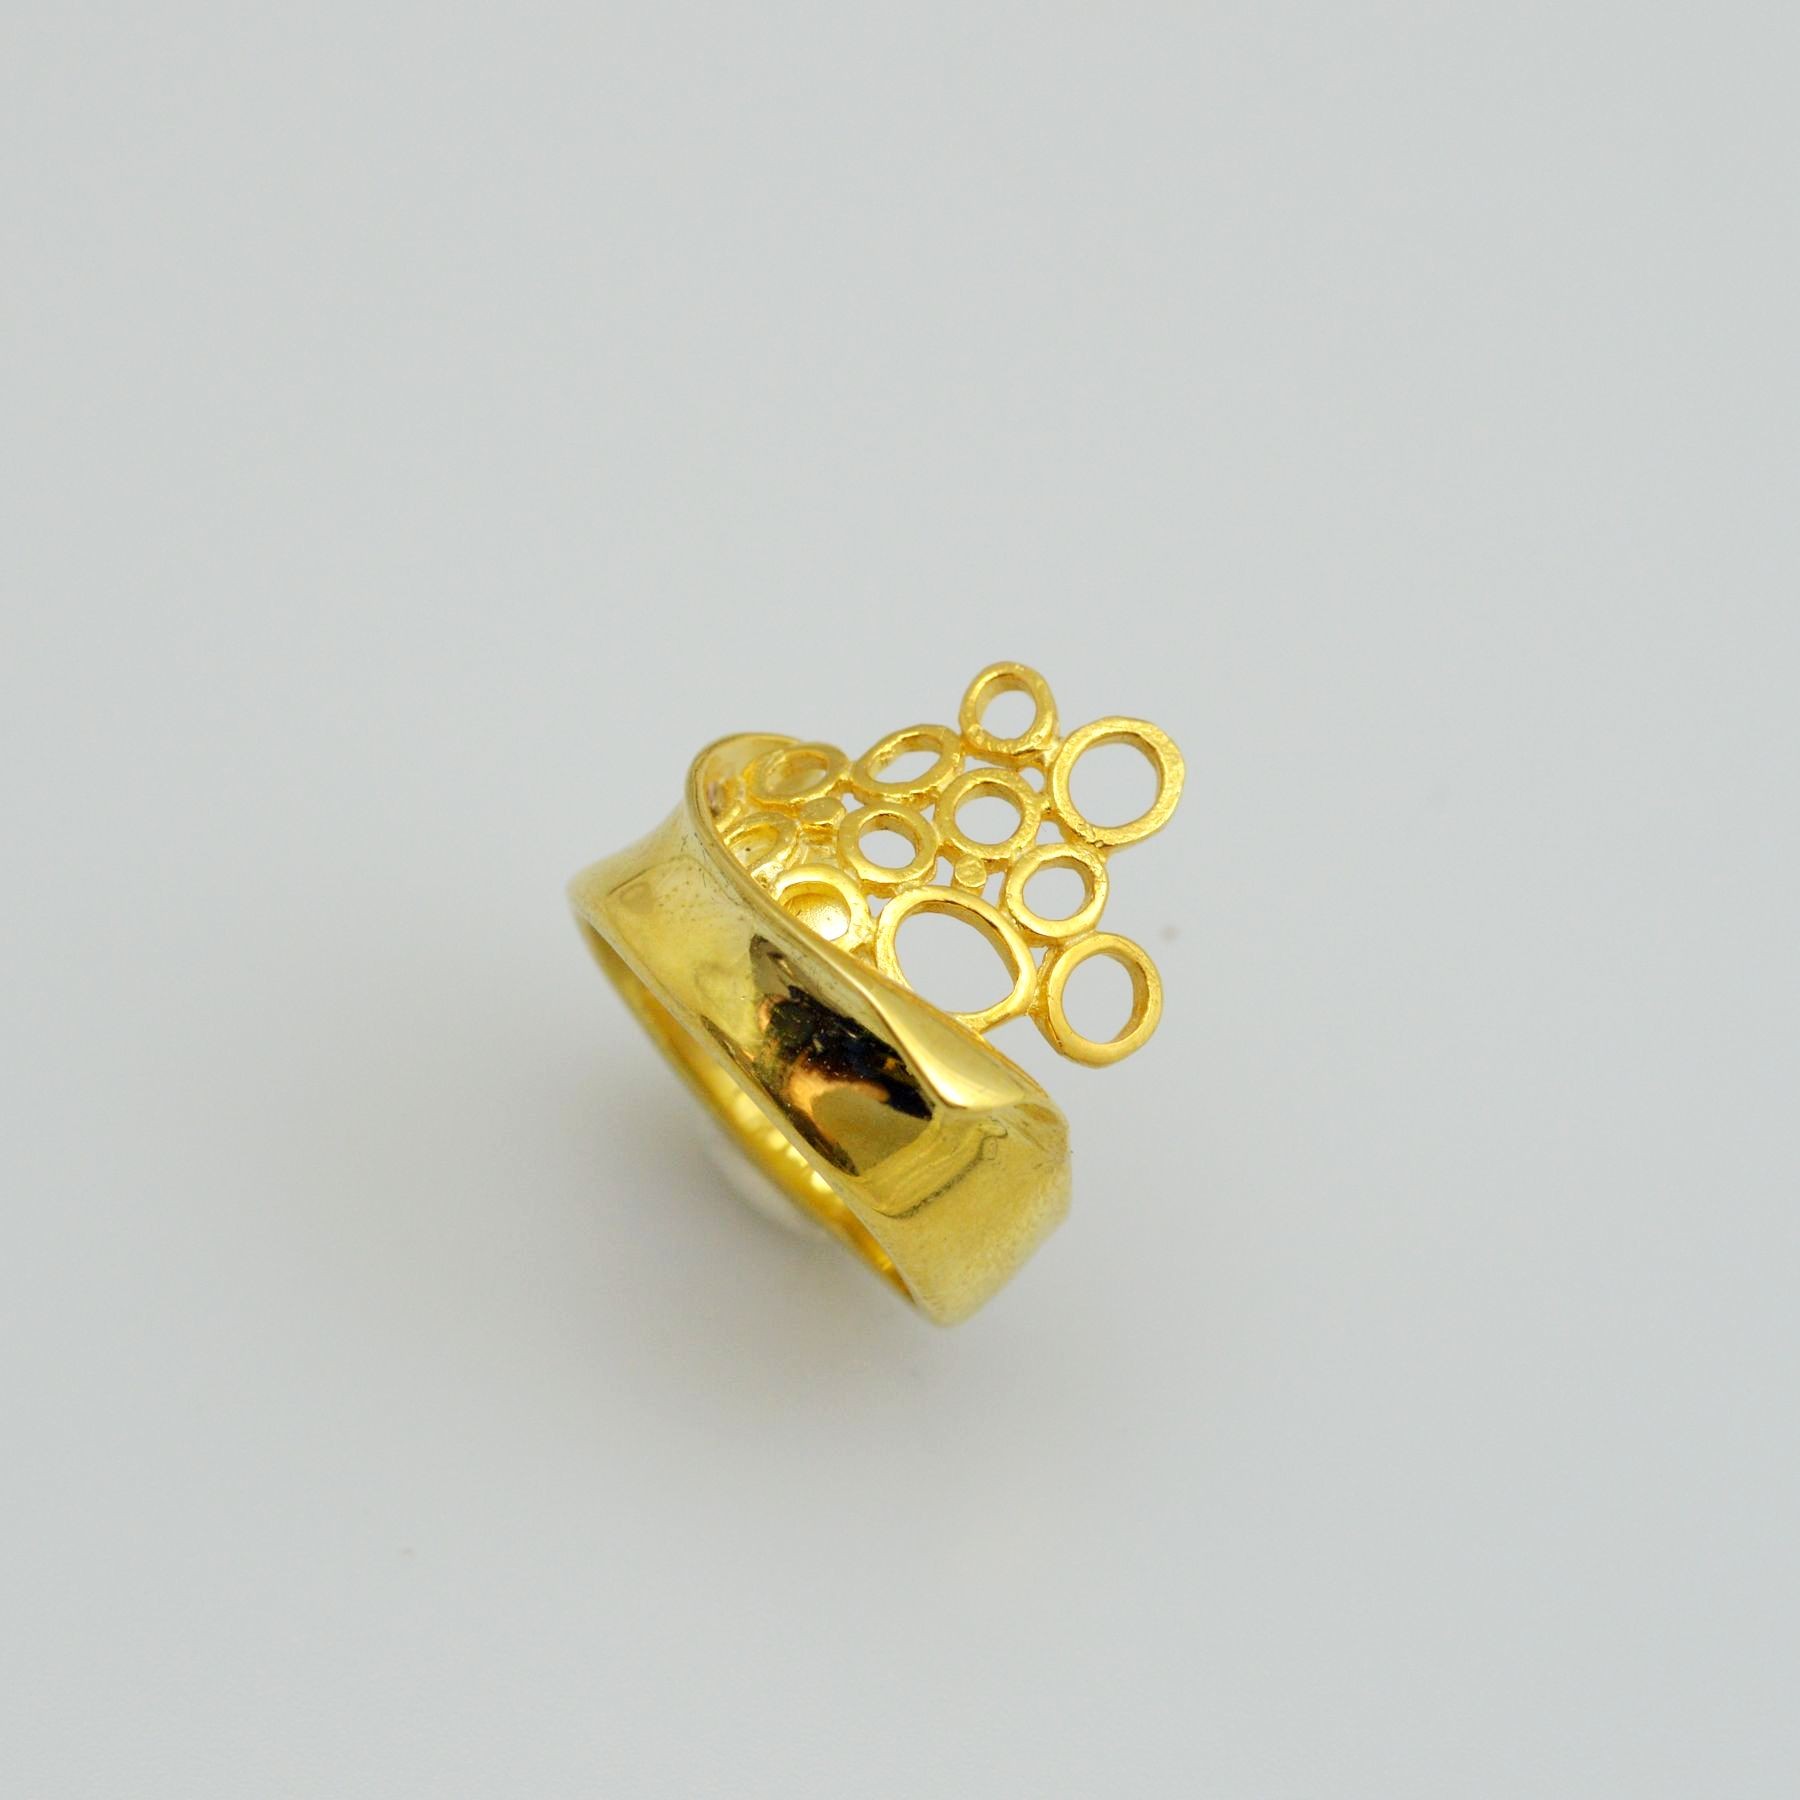 Silver ring 925 goldplated 